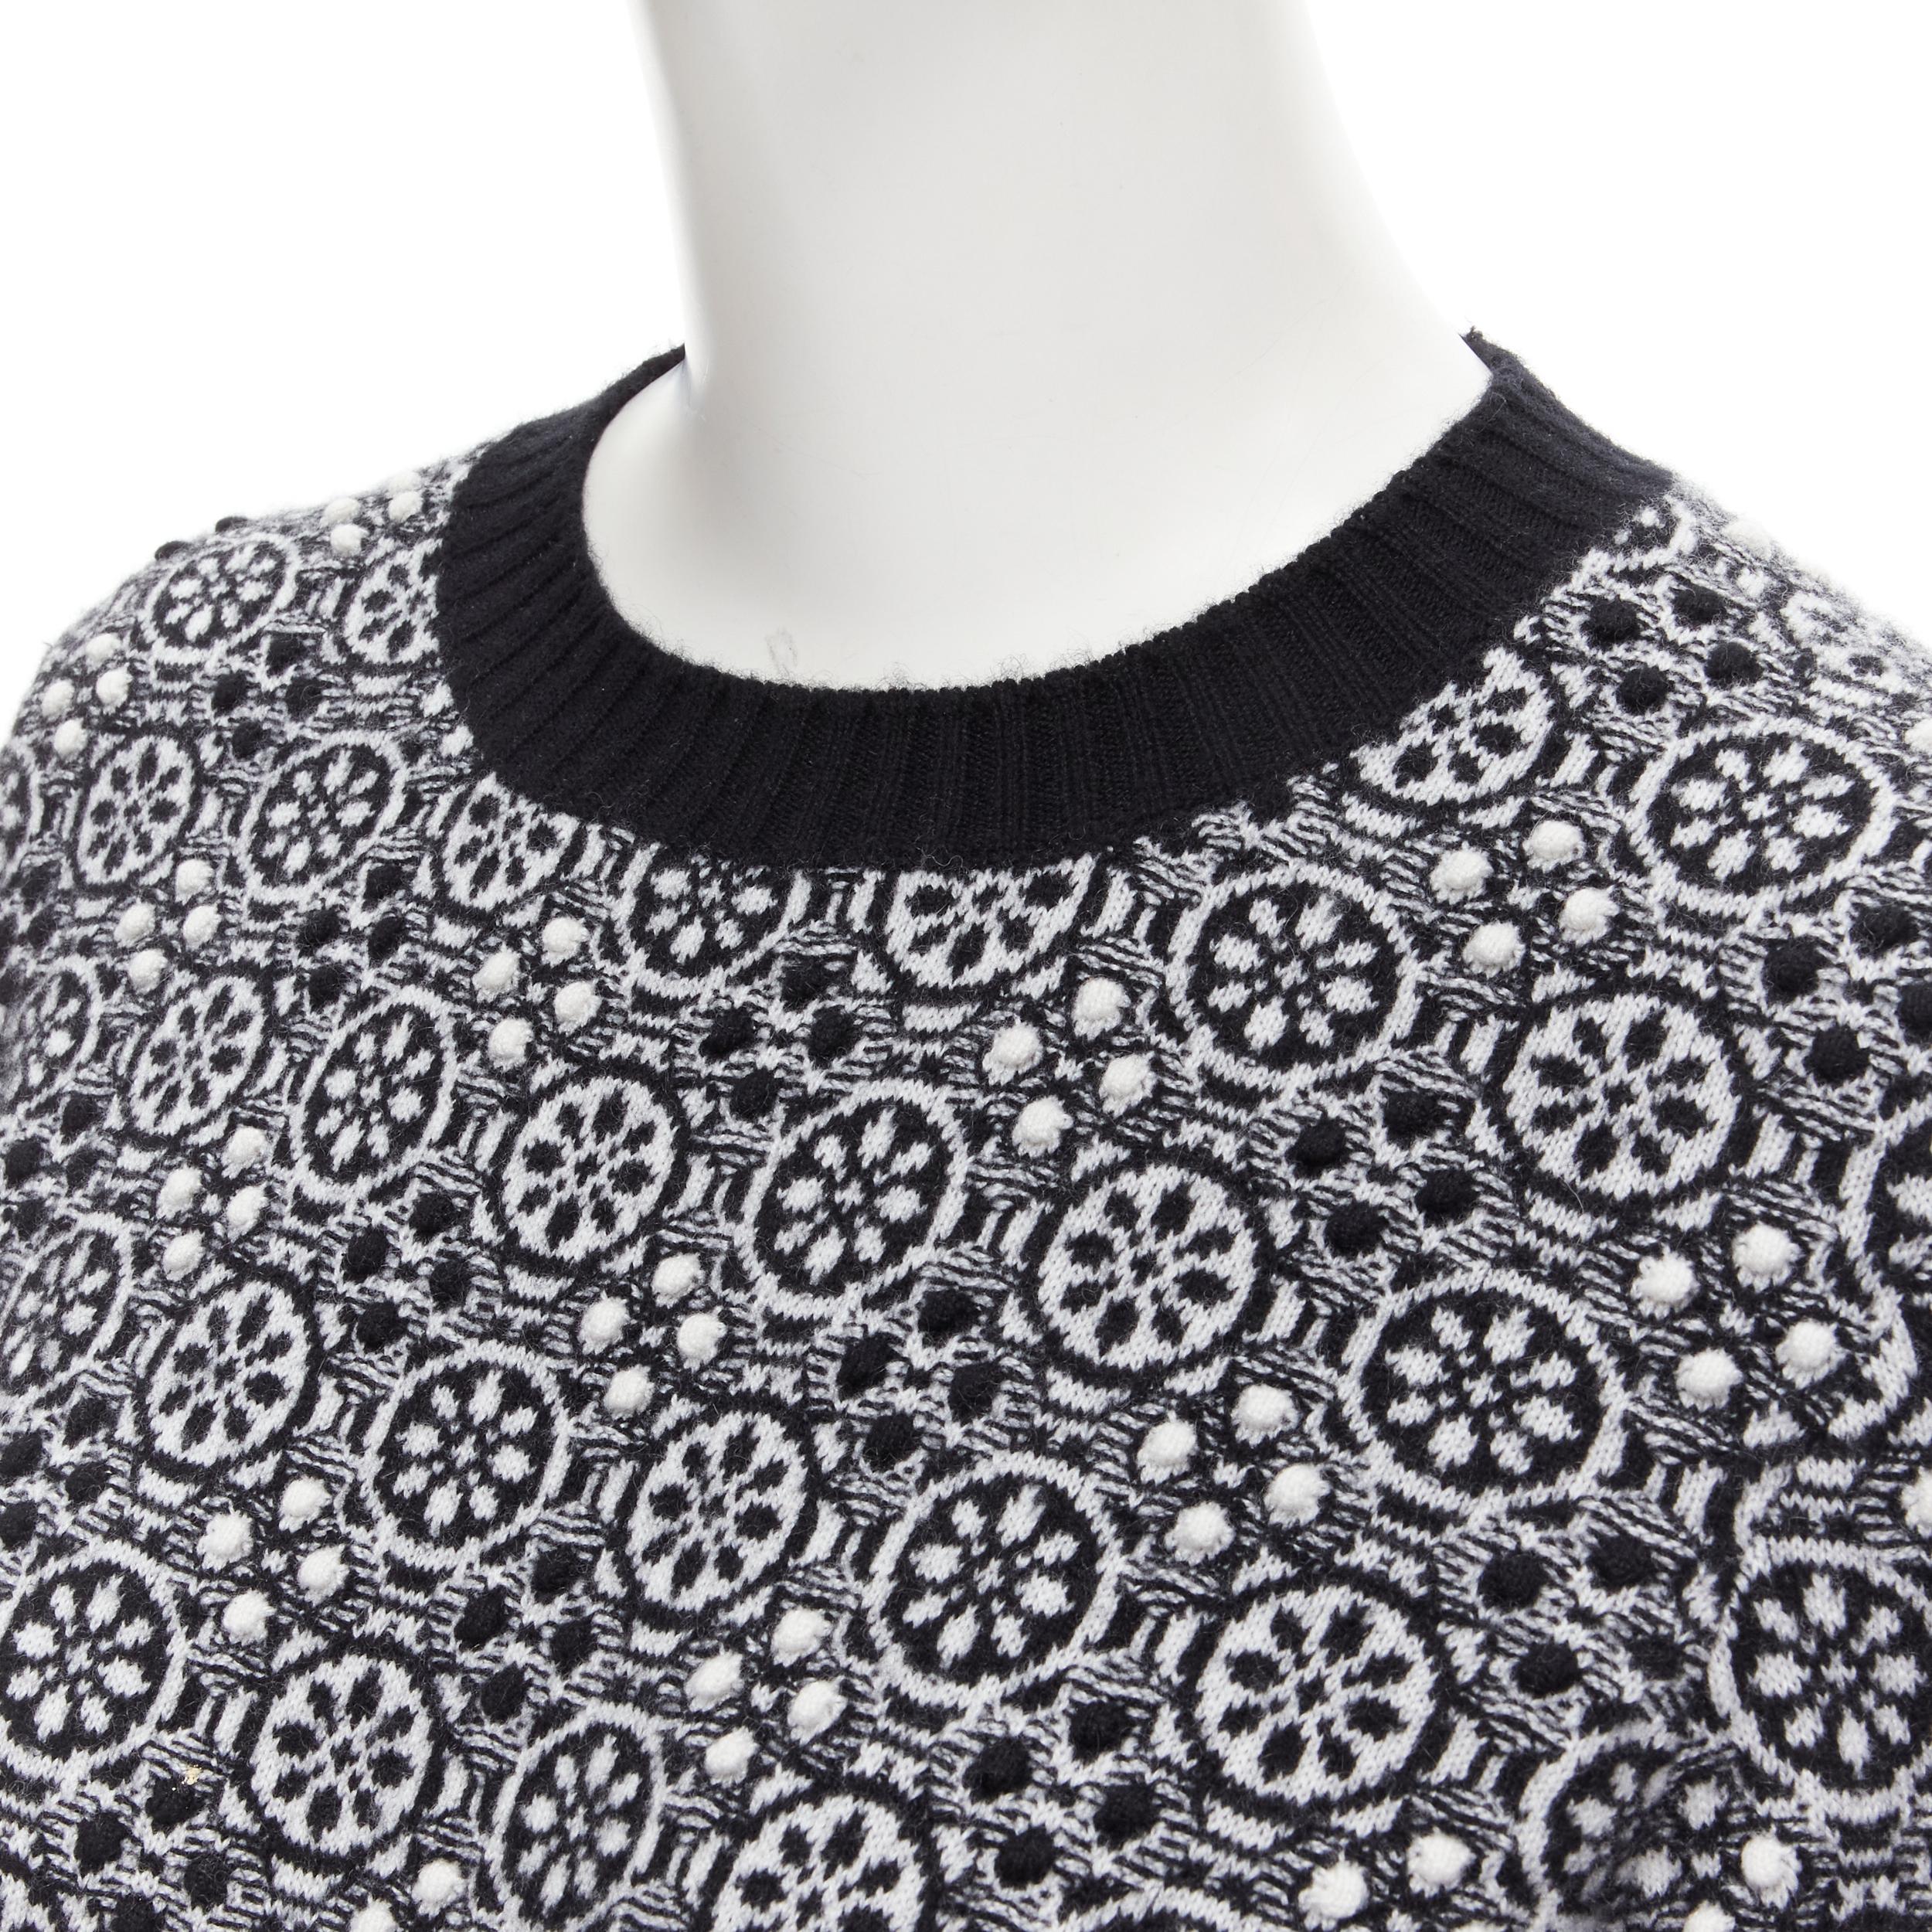 CHANEL 100% cashmere geometric pattern 3D Jacquard knit pullover sweater FR36 XS 
Reference: MELK/A00037 
Brand: Chanel 
Material: Cashmere 
Color: Black 
Pattern: Geometric 
Extra Detail: 3D textured Jacquard knit. Silver-tone CC charm at hem.